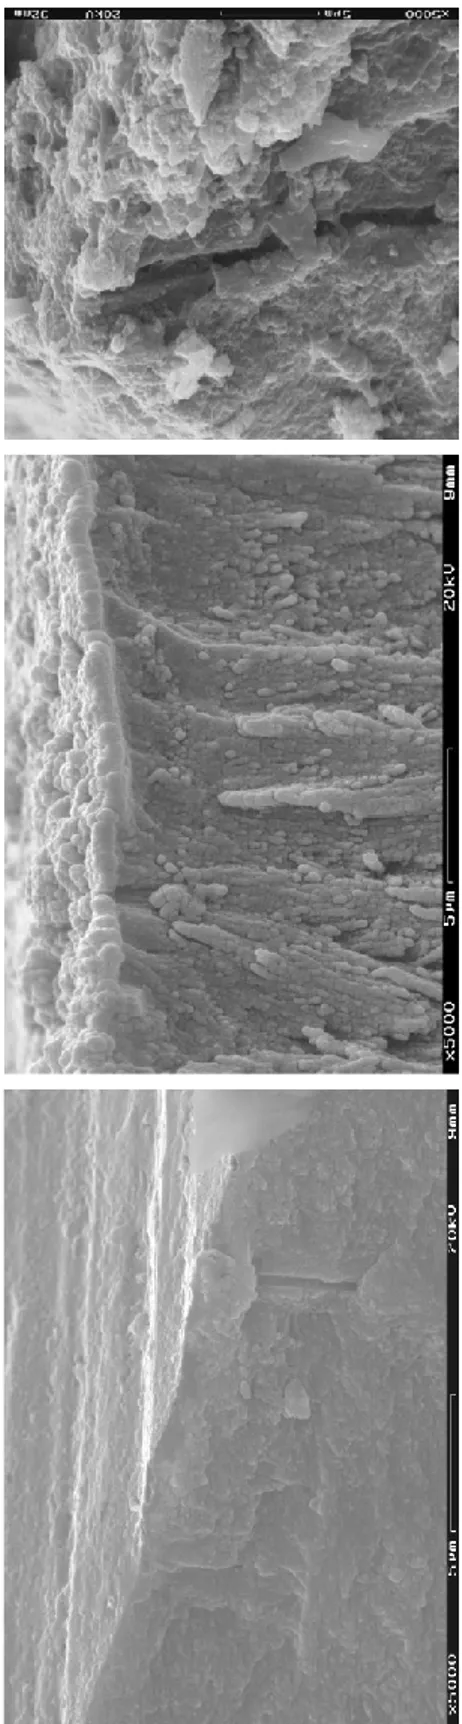 Fig. 5 - SEM micrograph of dentinal tubules.       Fig. 6 – SEM micrograph of occlusion of the exposed tubules or penetration in the tubules by different dental materials